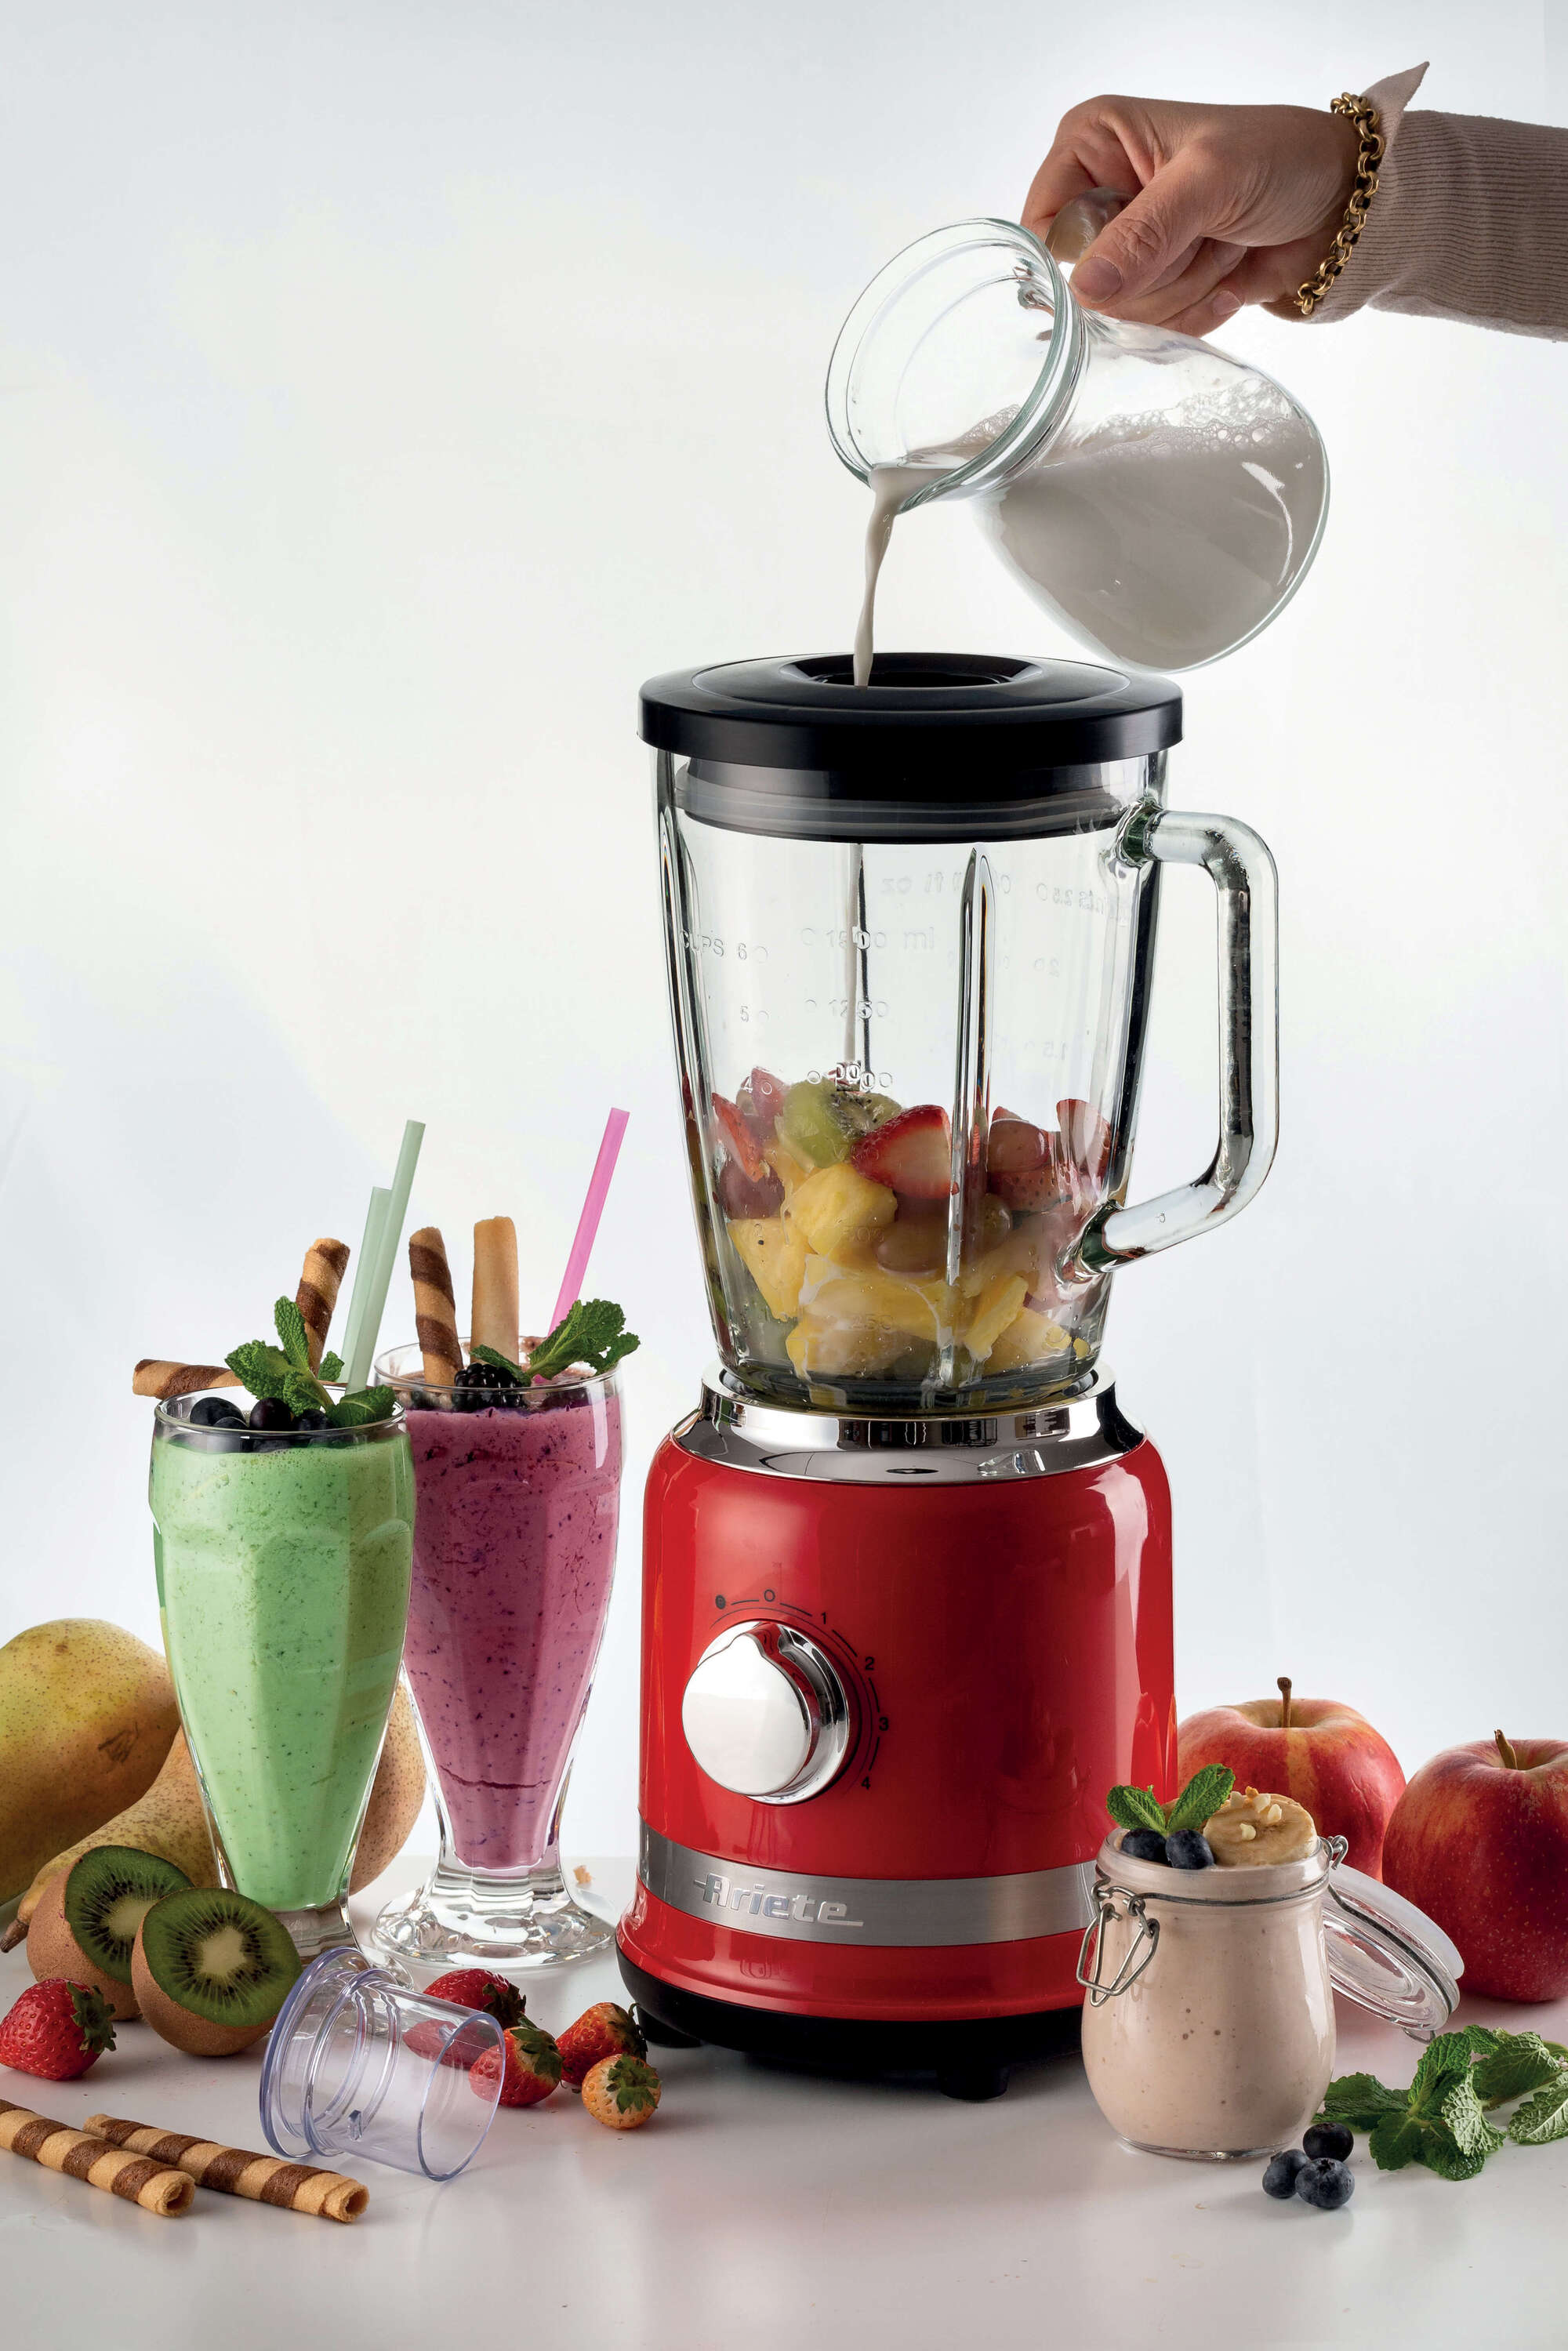 Ariete Vintage Blender With Glass Cup 1000W